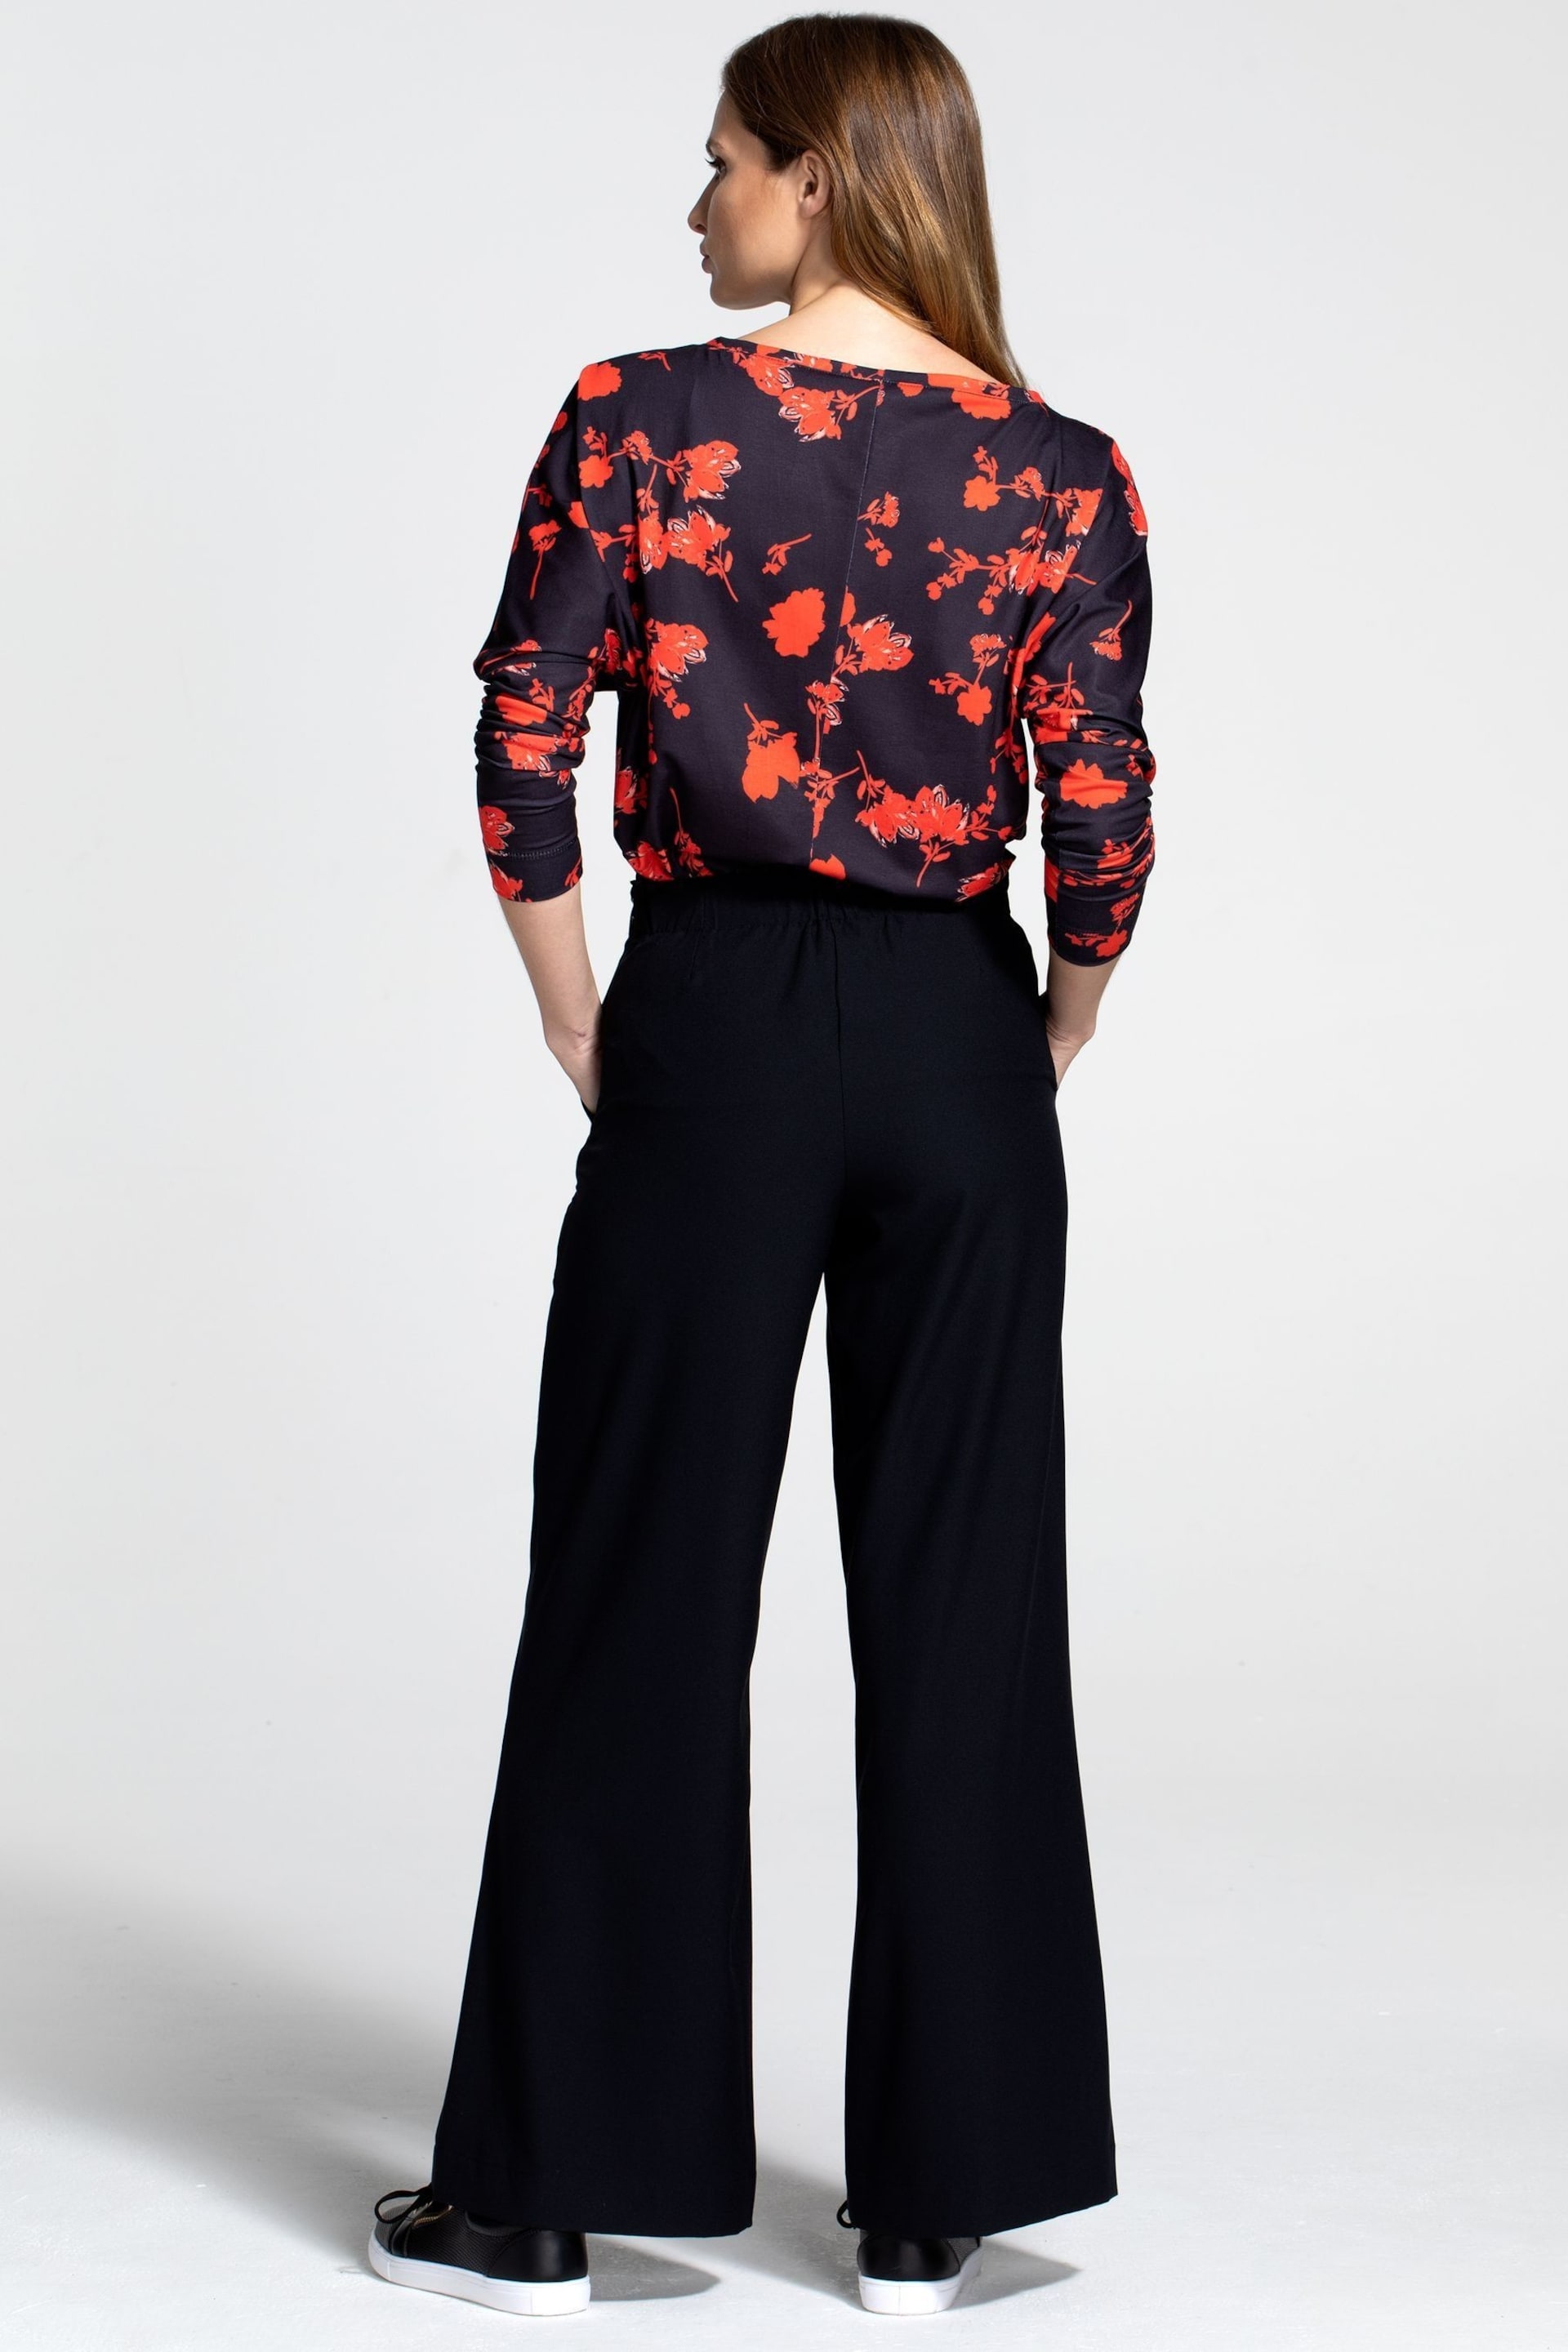 HotSquash Black Luxe-Lounge Wide Leg Crepe Trousers - Image 3 of 4